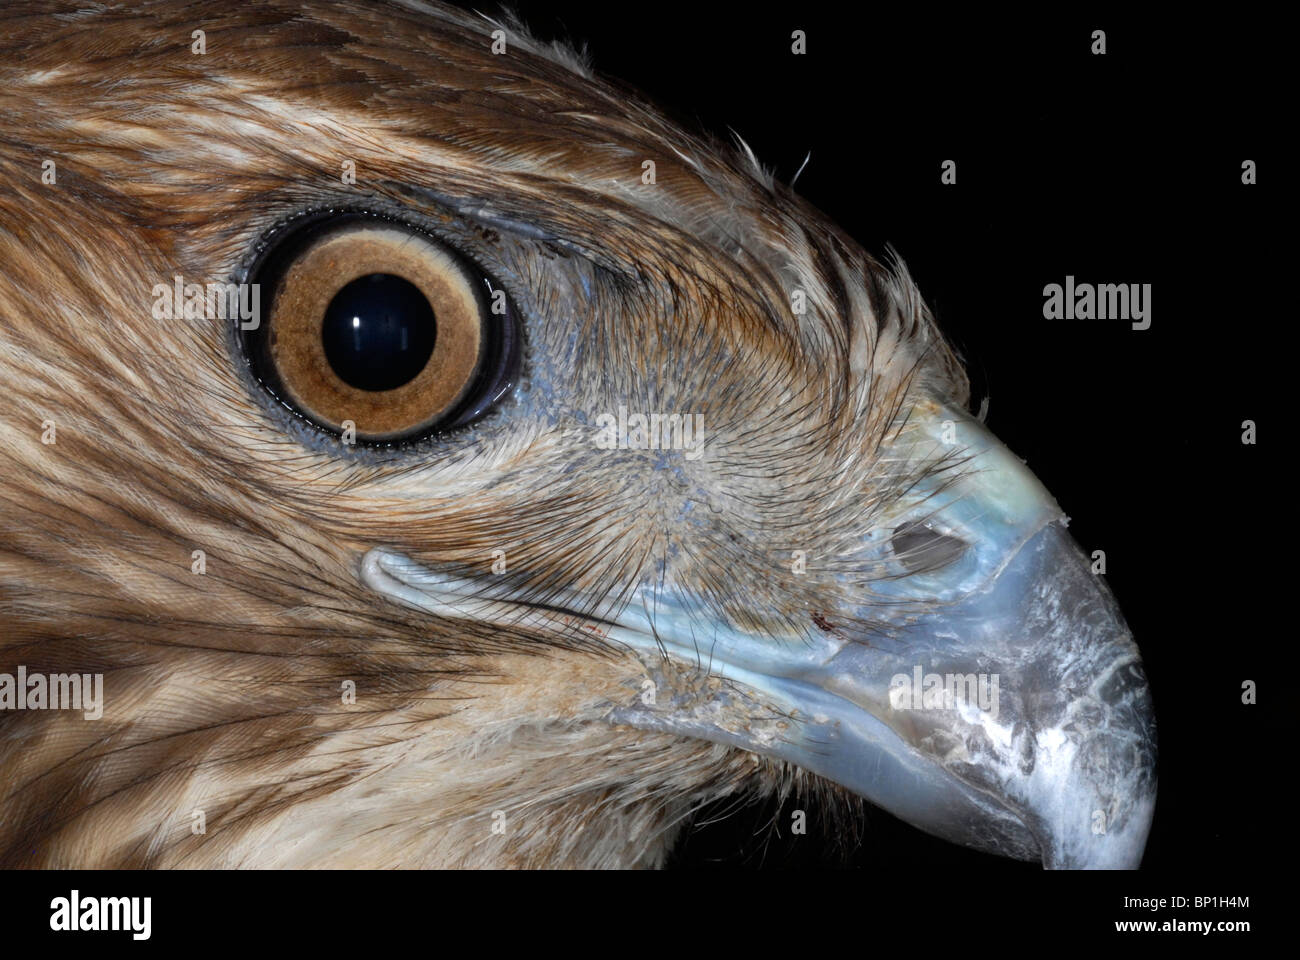 close-up of the head of a red-tailed hawk, Buteo jamaicensis Stock Photo